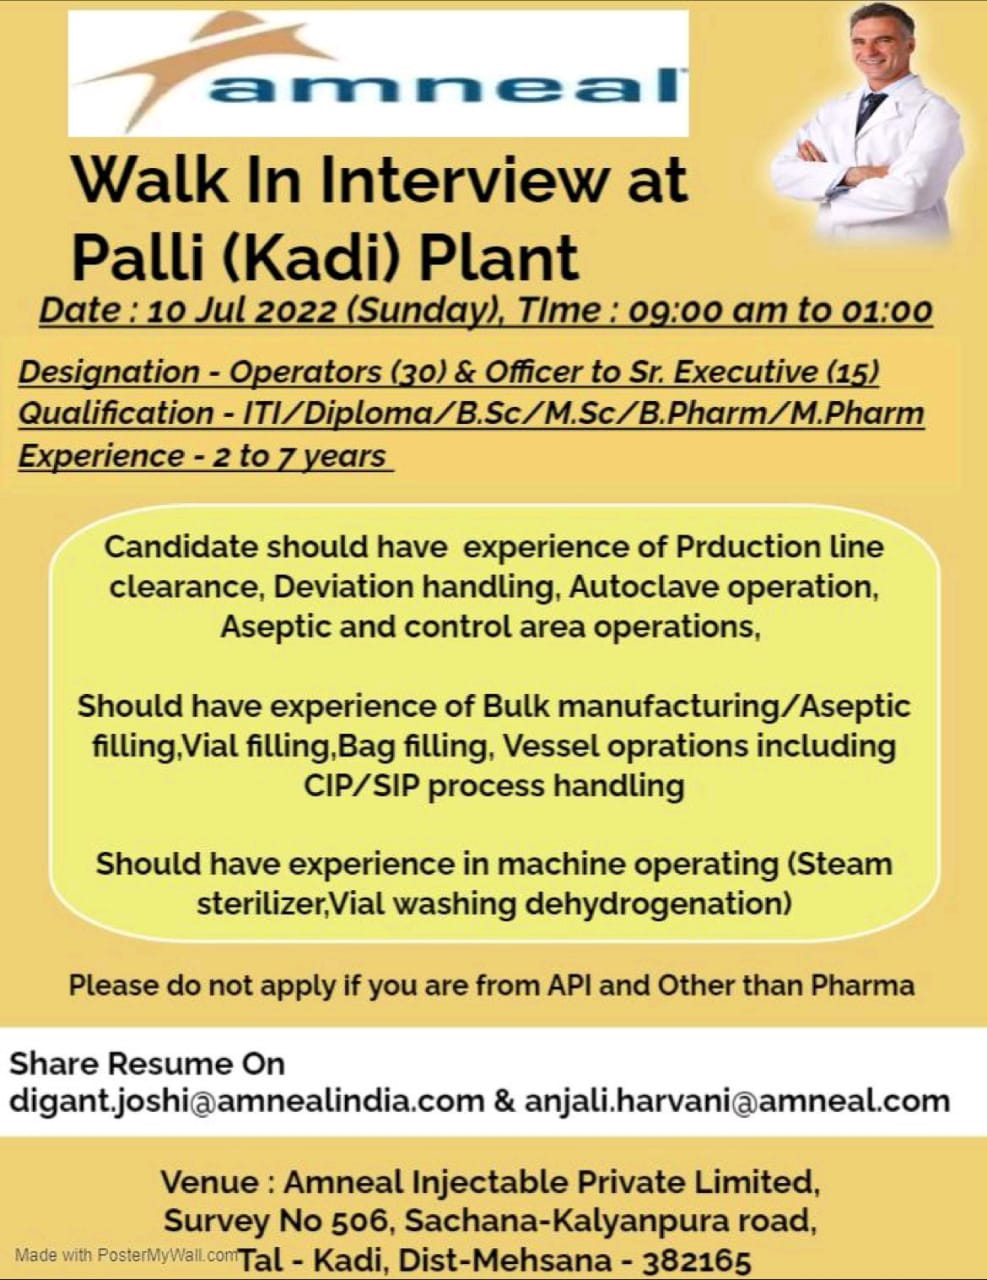 Job Available's for Amneal Injectable Pvt Ltd Walk-In Interview for ITI/ Diploma/ BSc/ MSc/ B Pharm/ M Pharm